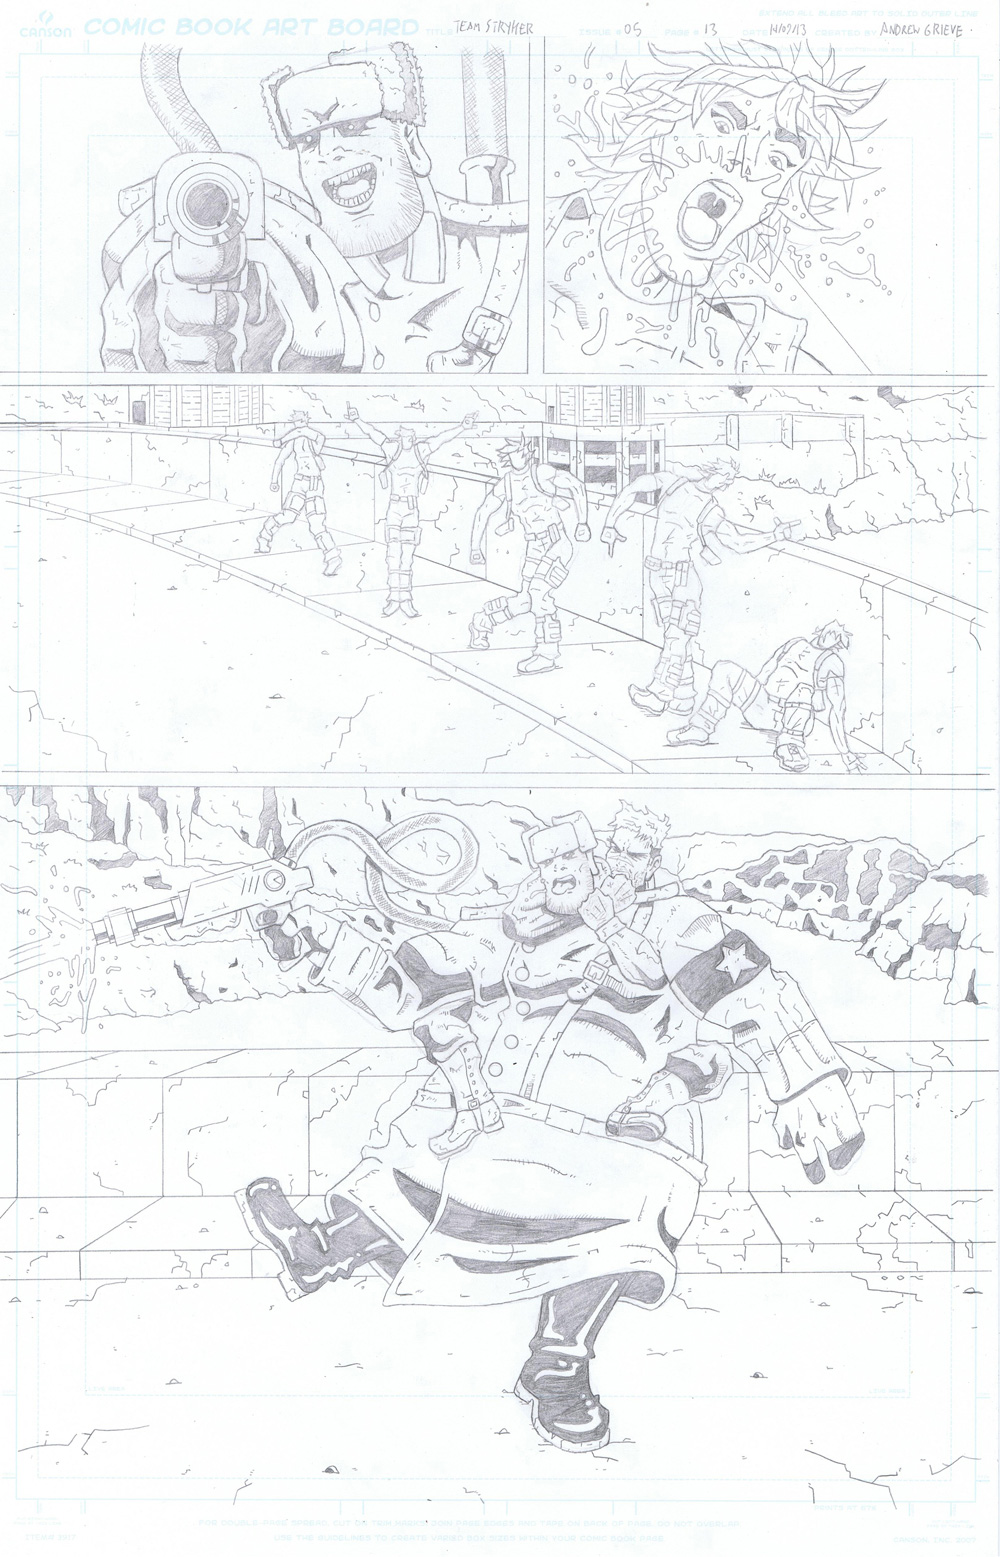 MISSION 005: PAGE 13 PENCIL